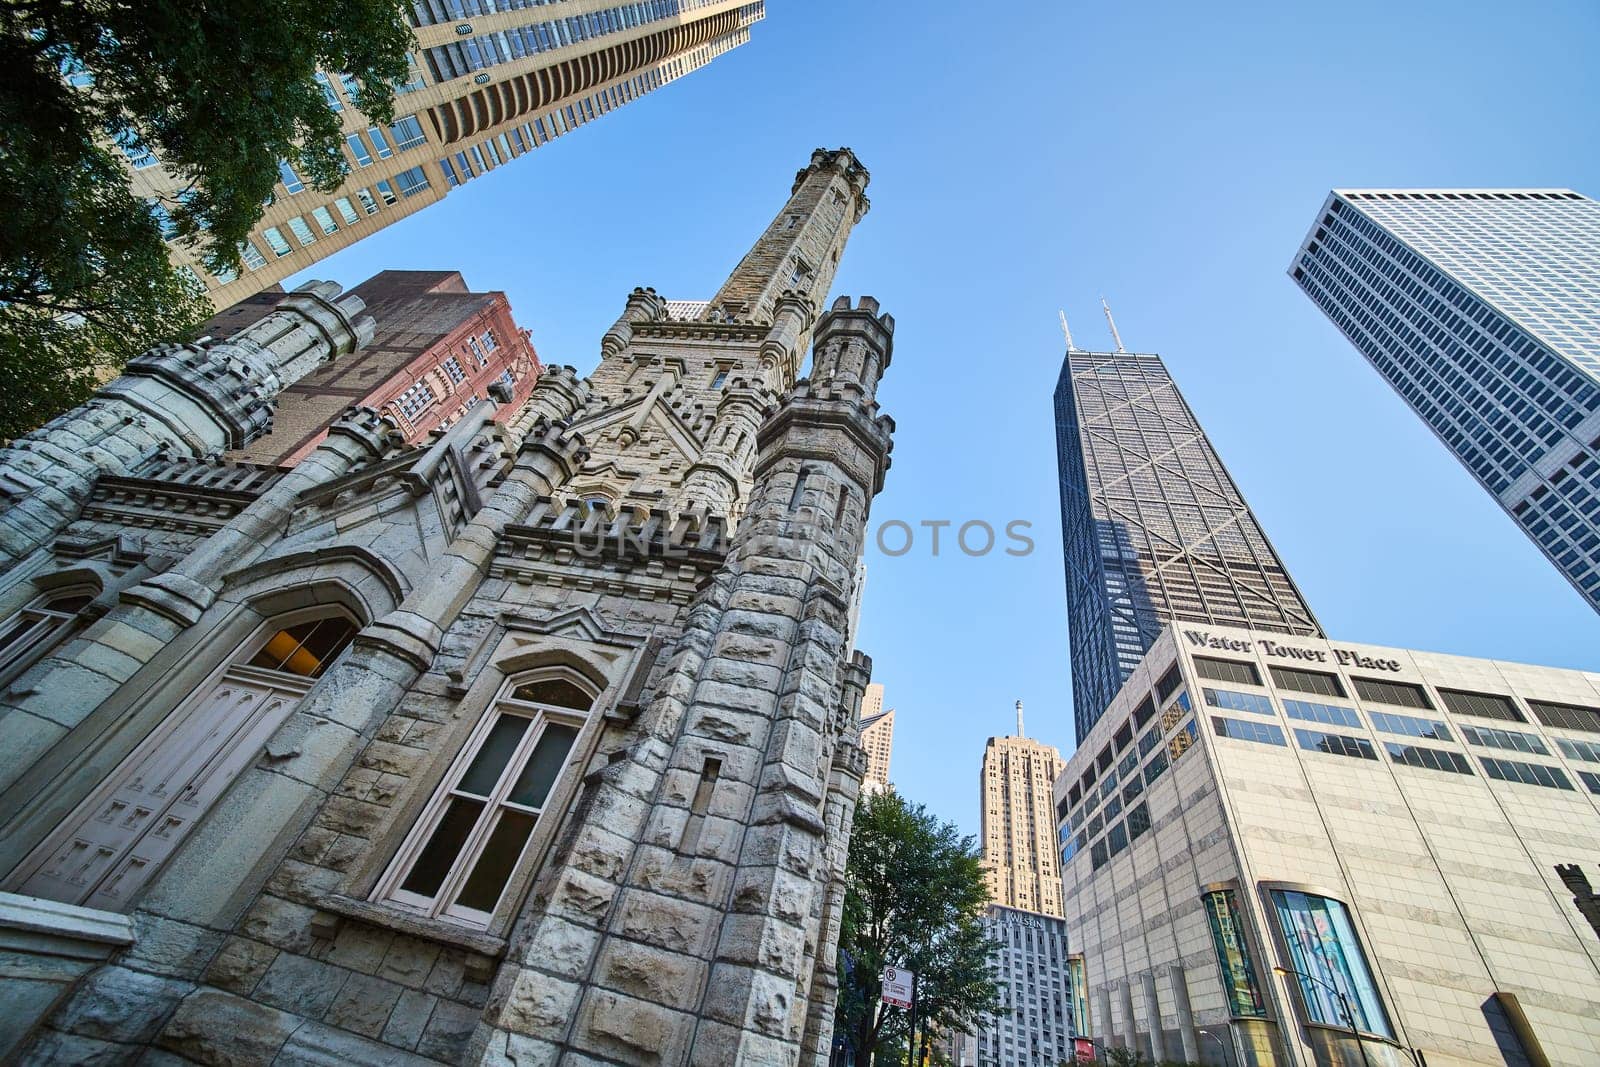 Image of Castle architecture of Chicago original, historic water tower under blue sky with city skyscrapers